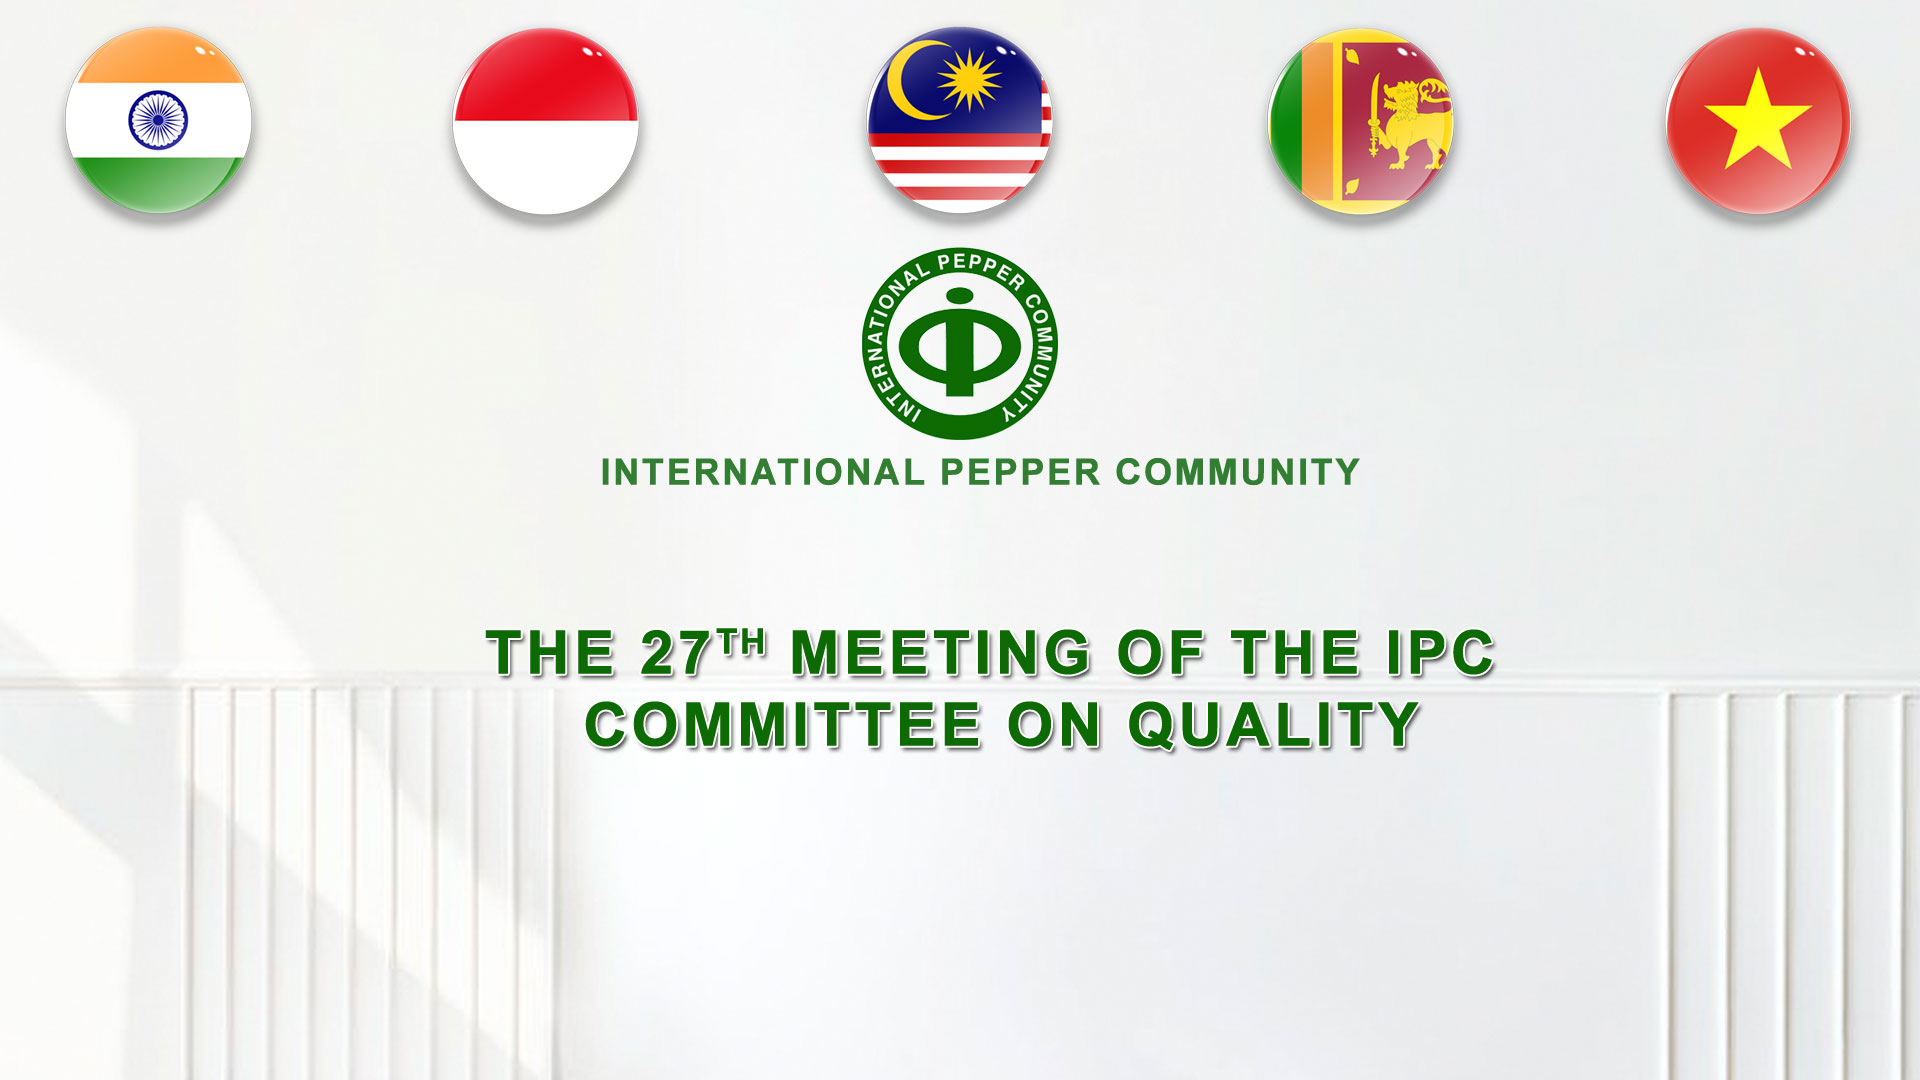 The 27th Of IPC Committee On Quality, 30 Nov 2021